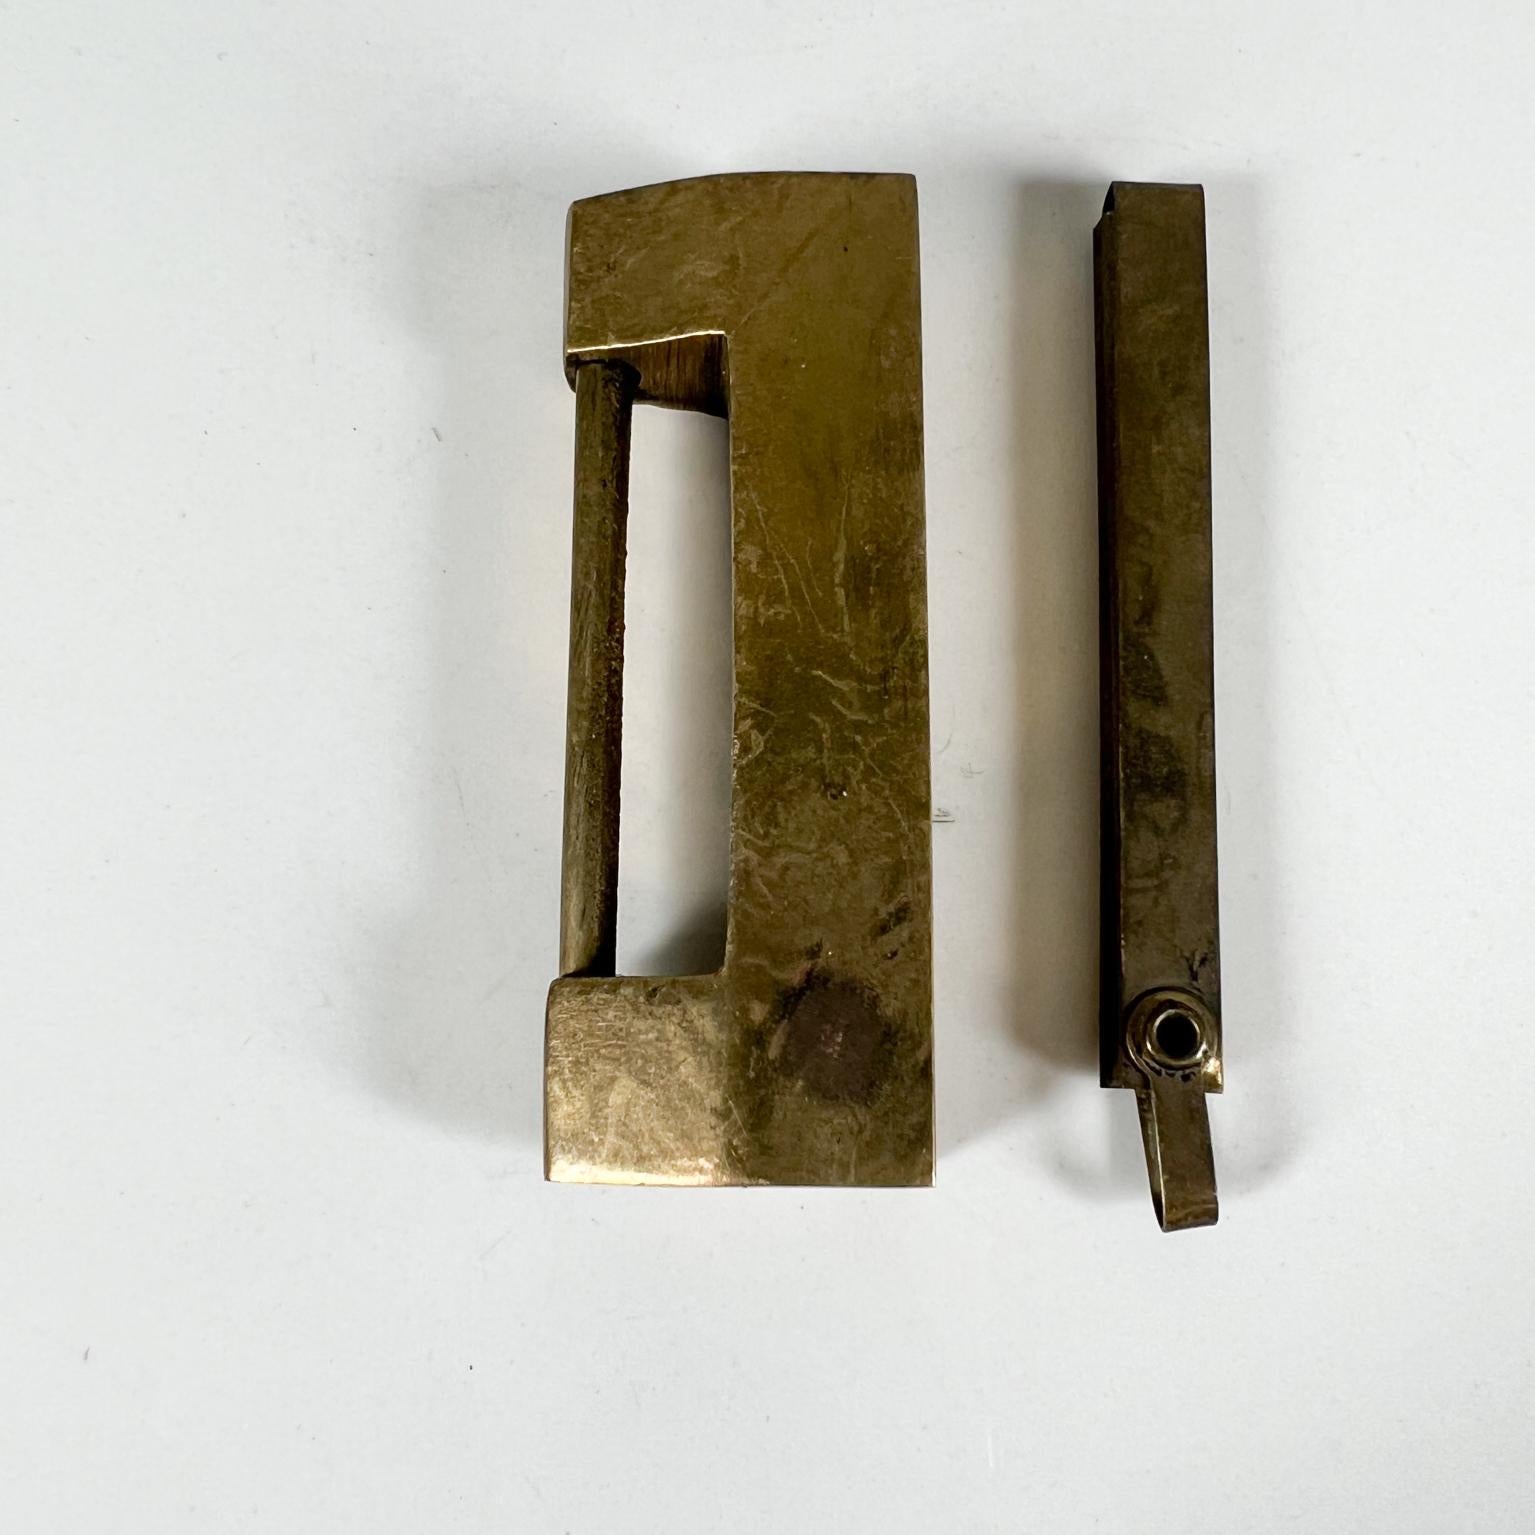 1930s Vintage heavy duty brass lock Chinese.
Measures: 2.82 long x .63 deep x 1.25 wide.
Preowned original vintage condition.
See images provided.
 